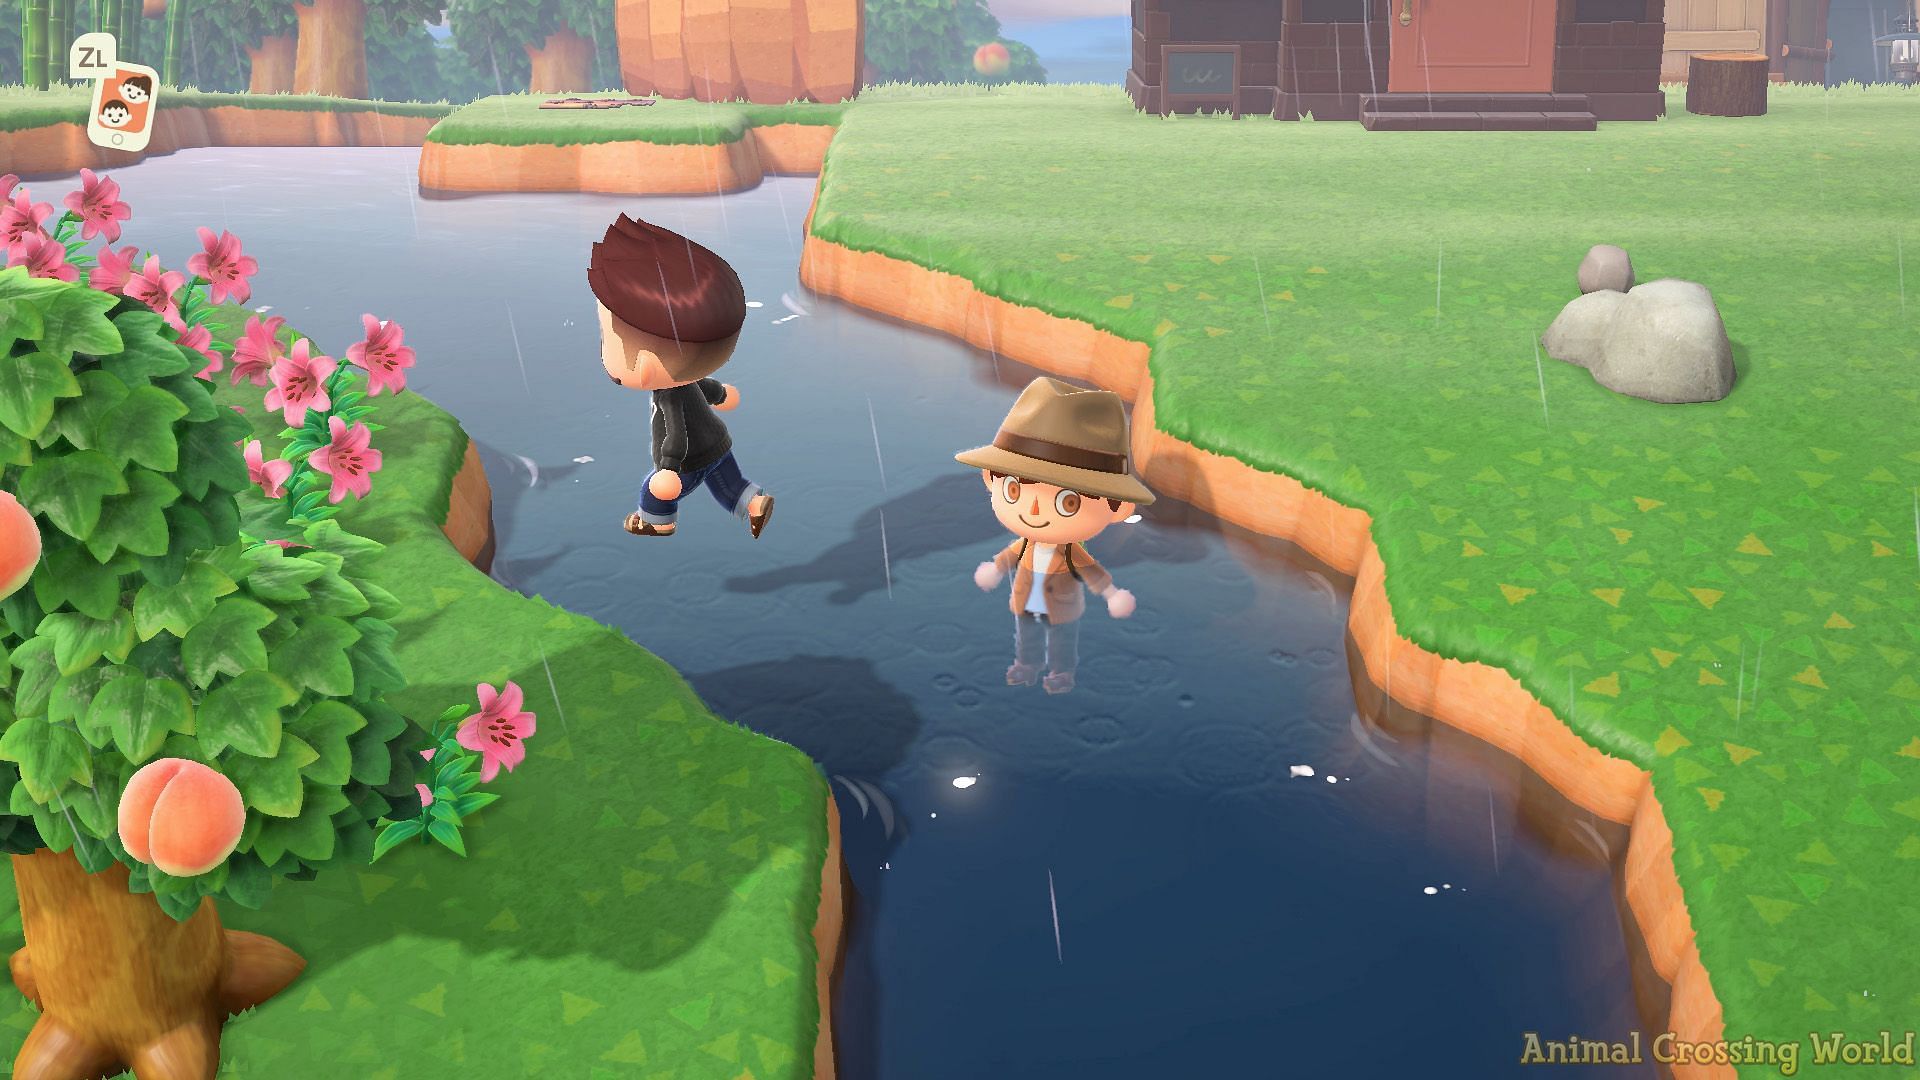 Working glitches players can try out in Animal Crossing: New Horizons (Image via Animal Crossing World)